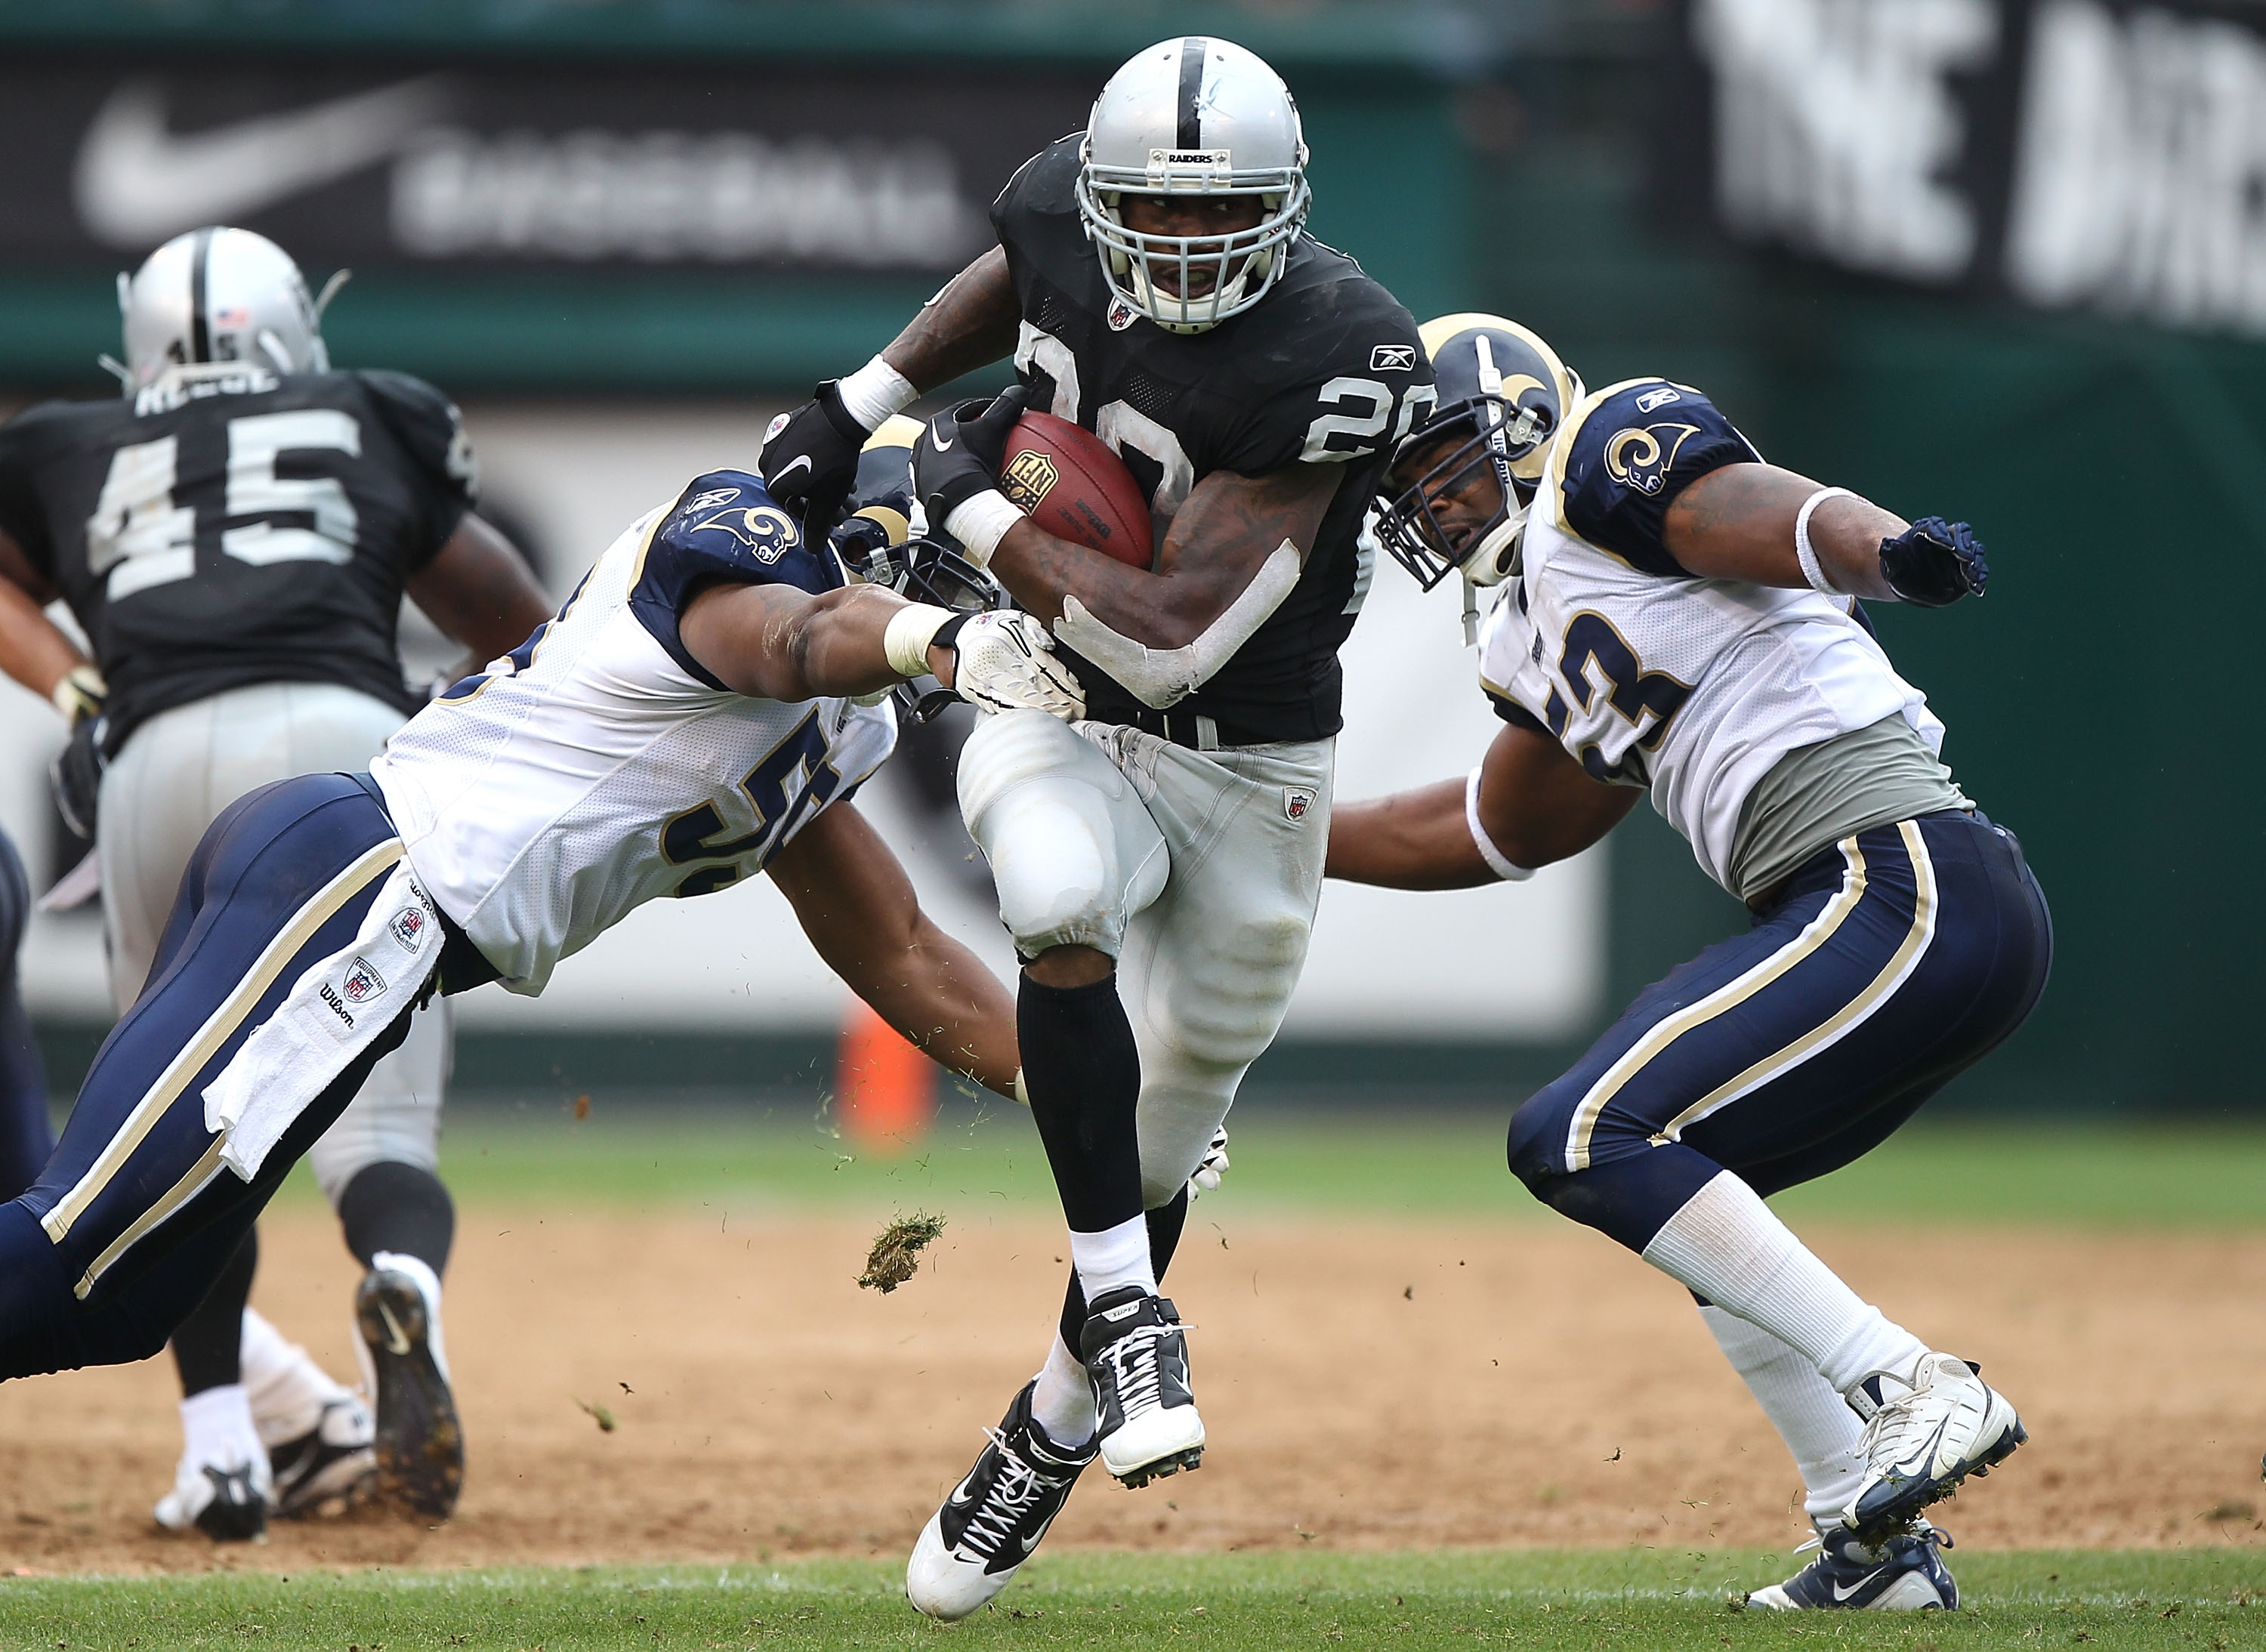 OAKLAND, CA - SEPTEMBER 19:  Darren McFadden #20 of the Oakland Raiders runs against the St. Louis Rams during an NFL game at Oakland-Alameda County Coliseum on September 19, 2010 in Oakland, California.  (Photo by Jed Jacobsohn/Getty Images)